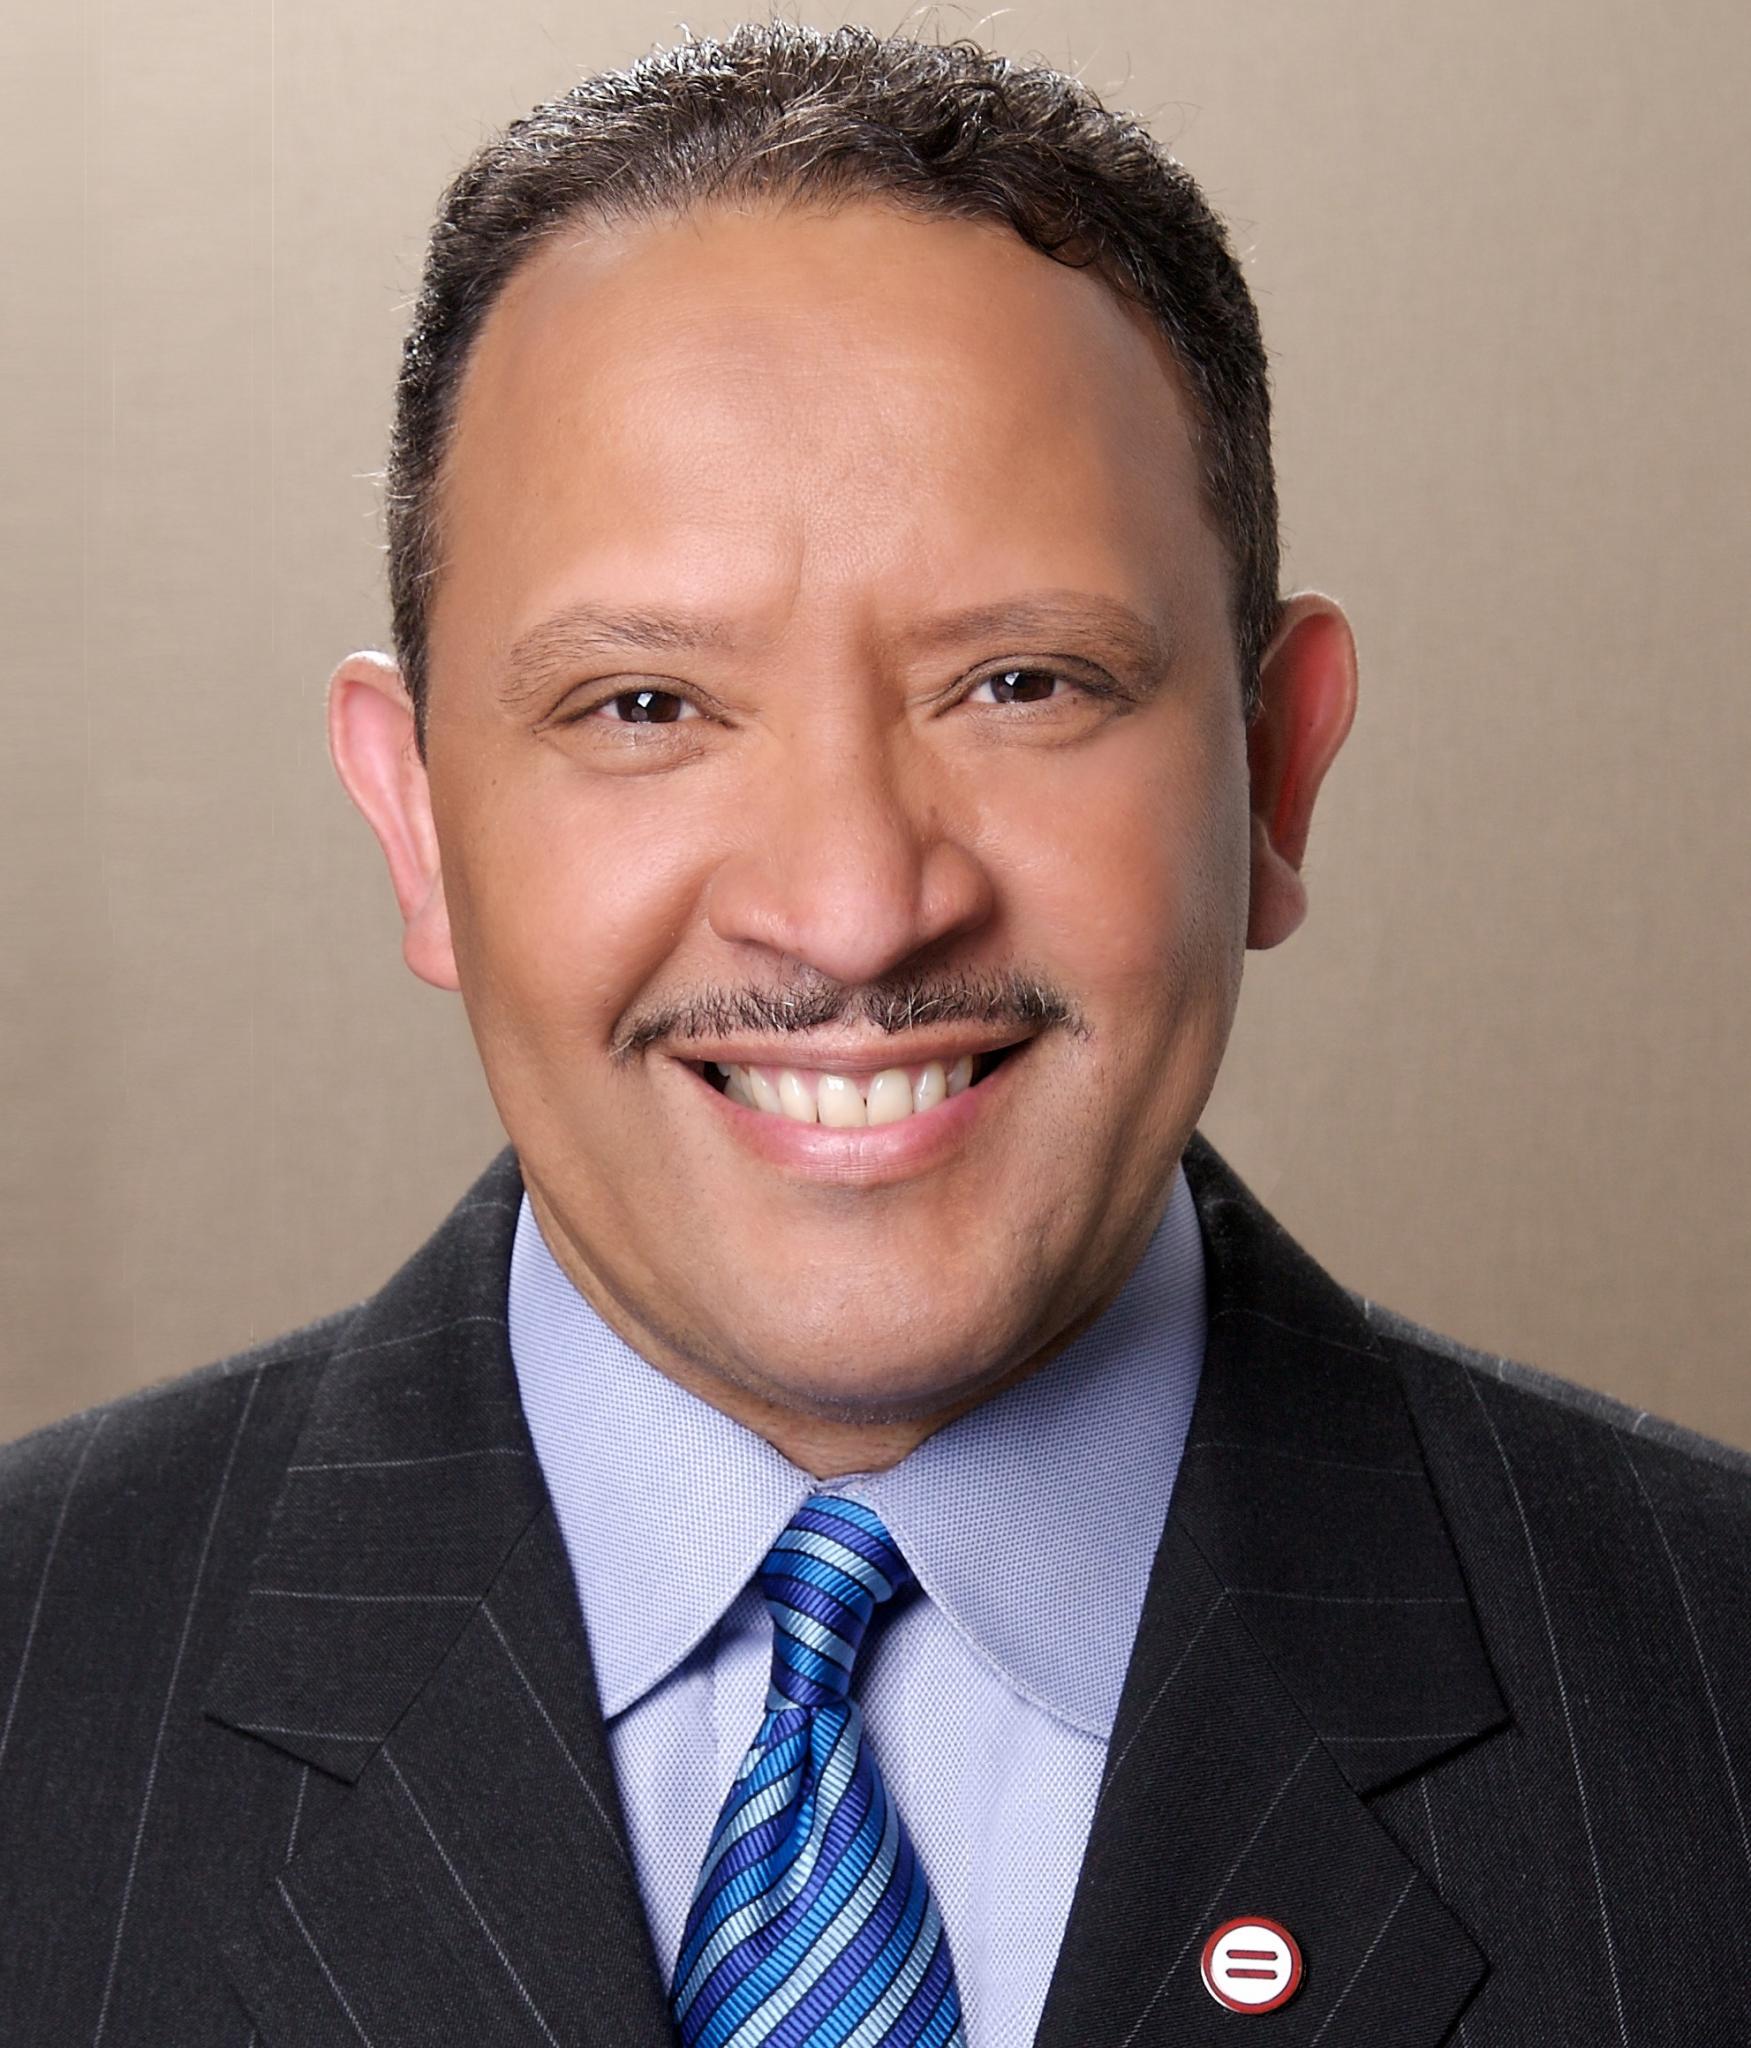 National Urban League's Marc Morial Reveals Top Issue Facing Black Community